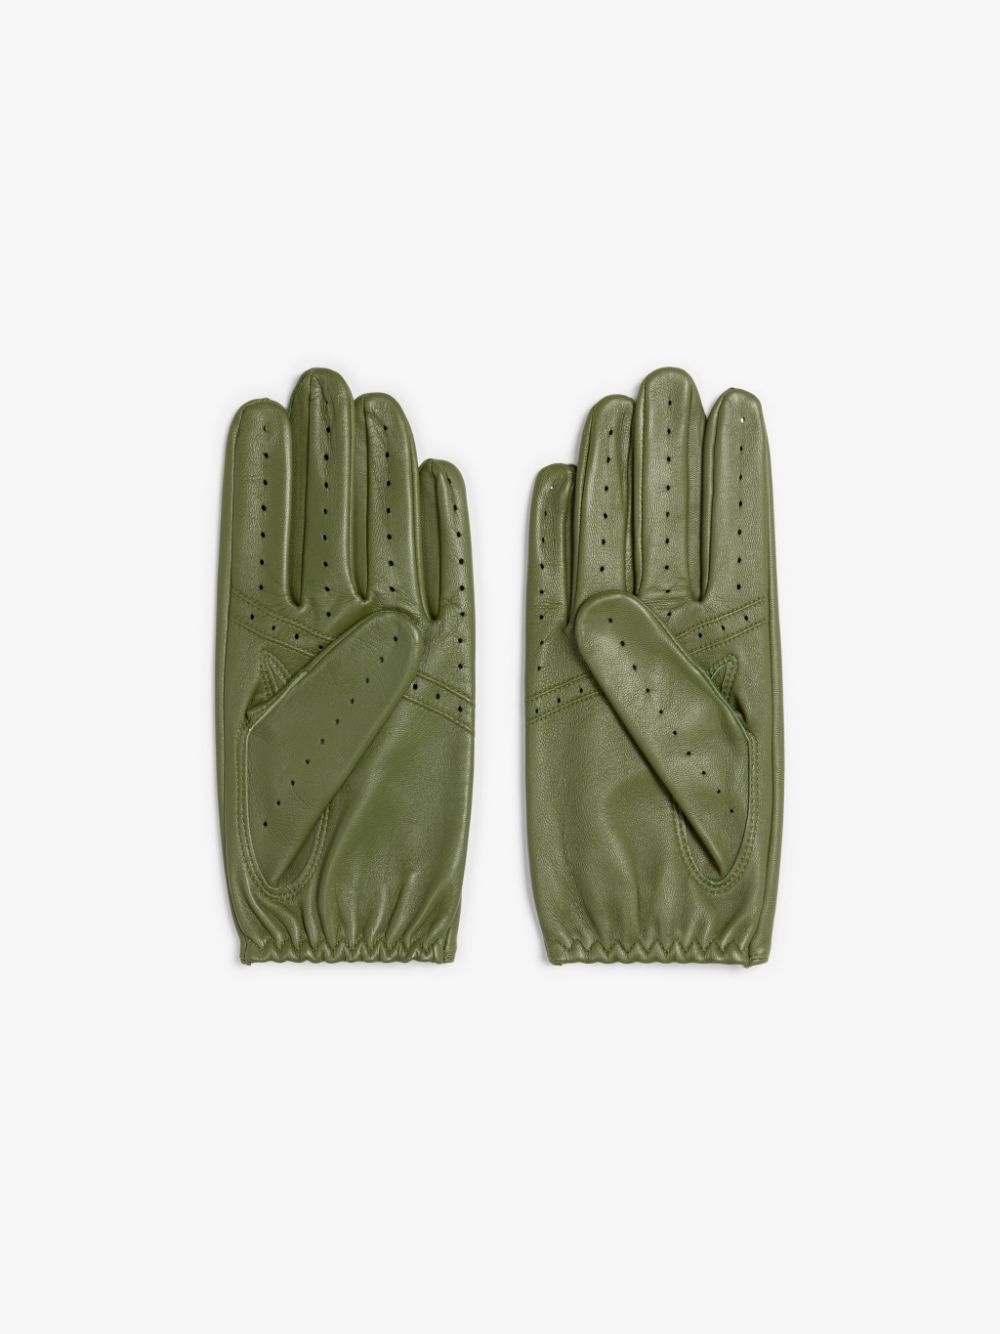 GREEN LEATHER DRIVING GLOVES - 3